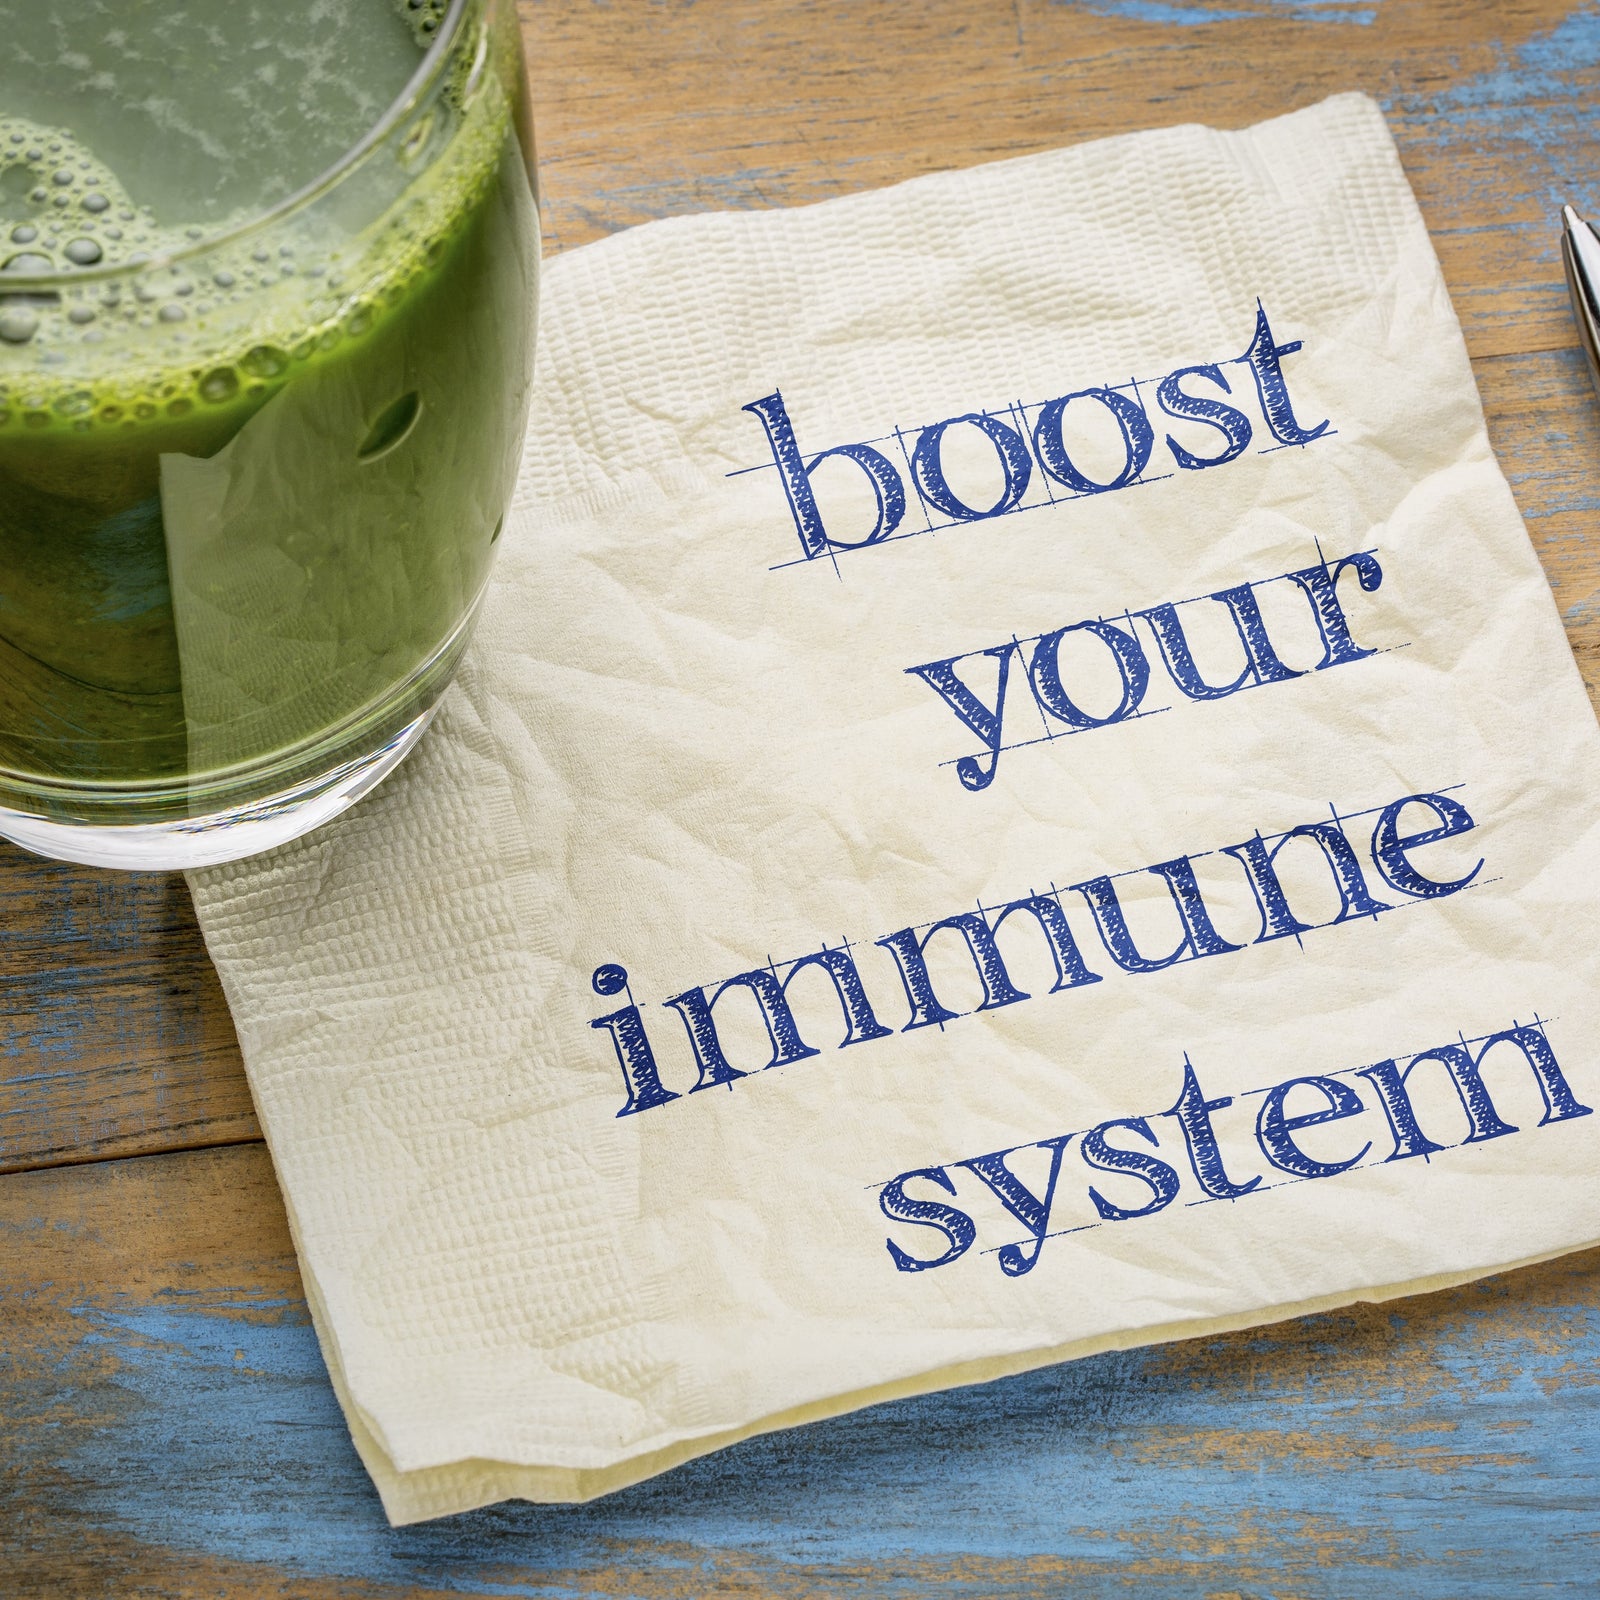 Immune System - Support Naturally Through Nutrition